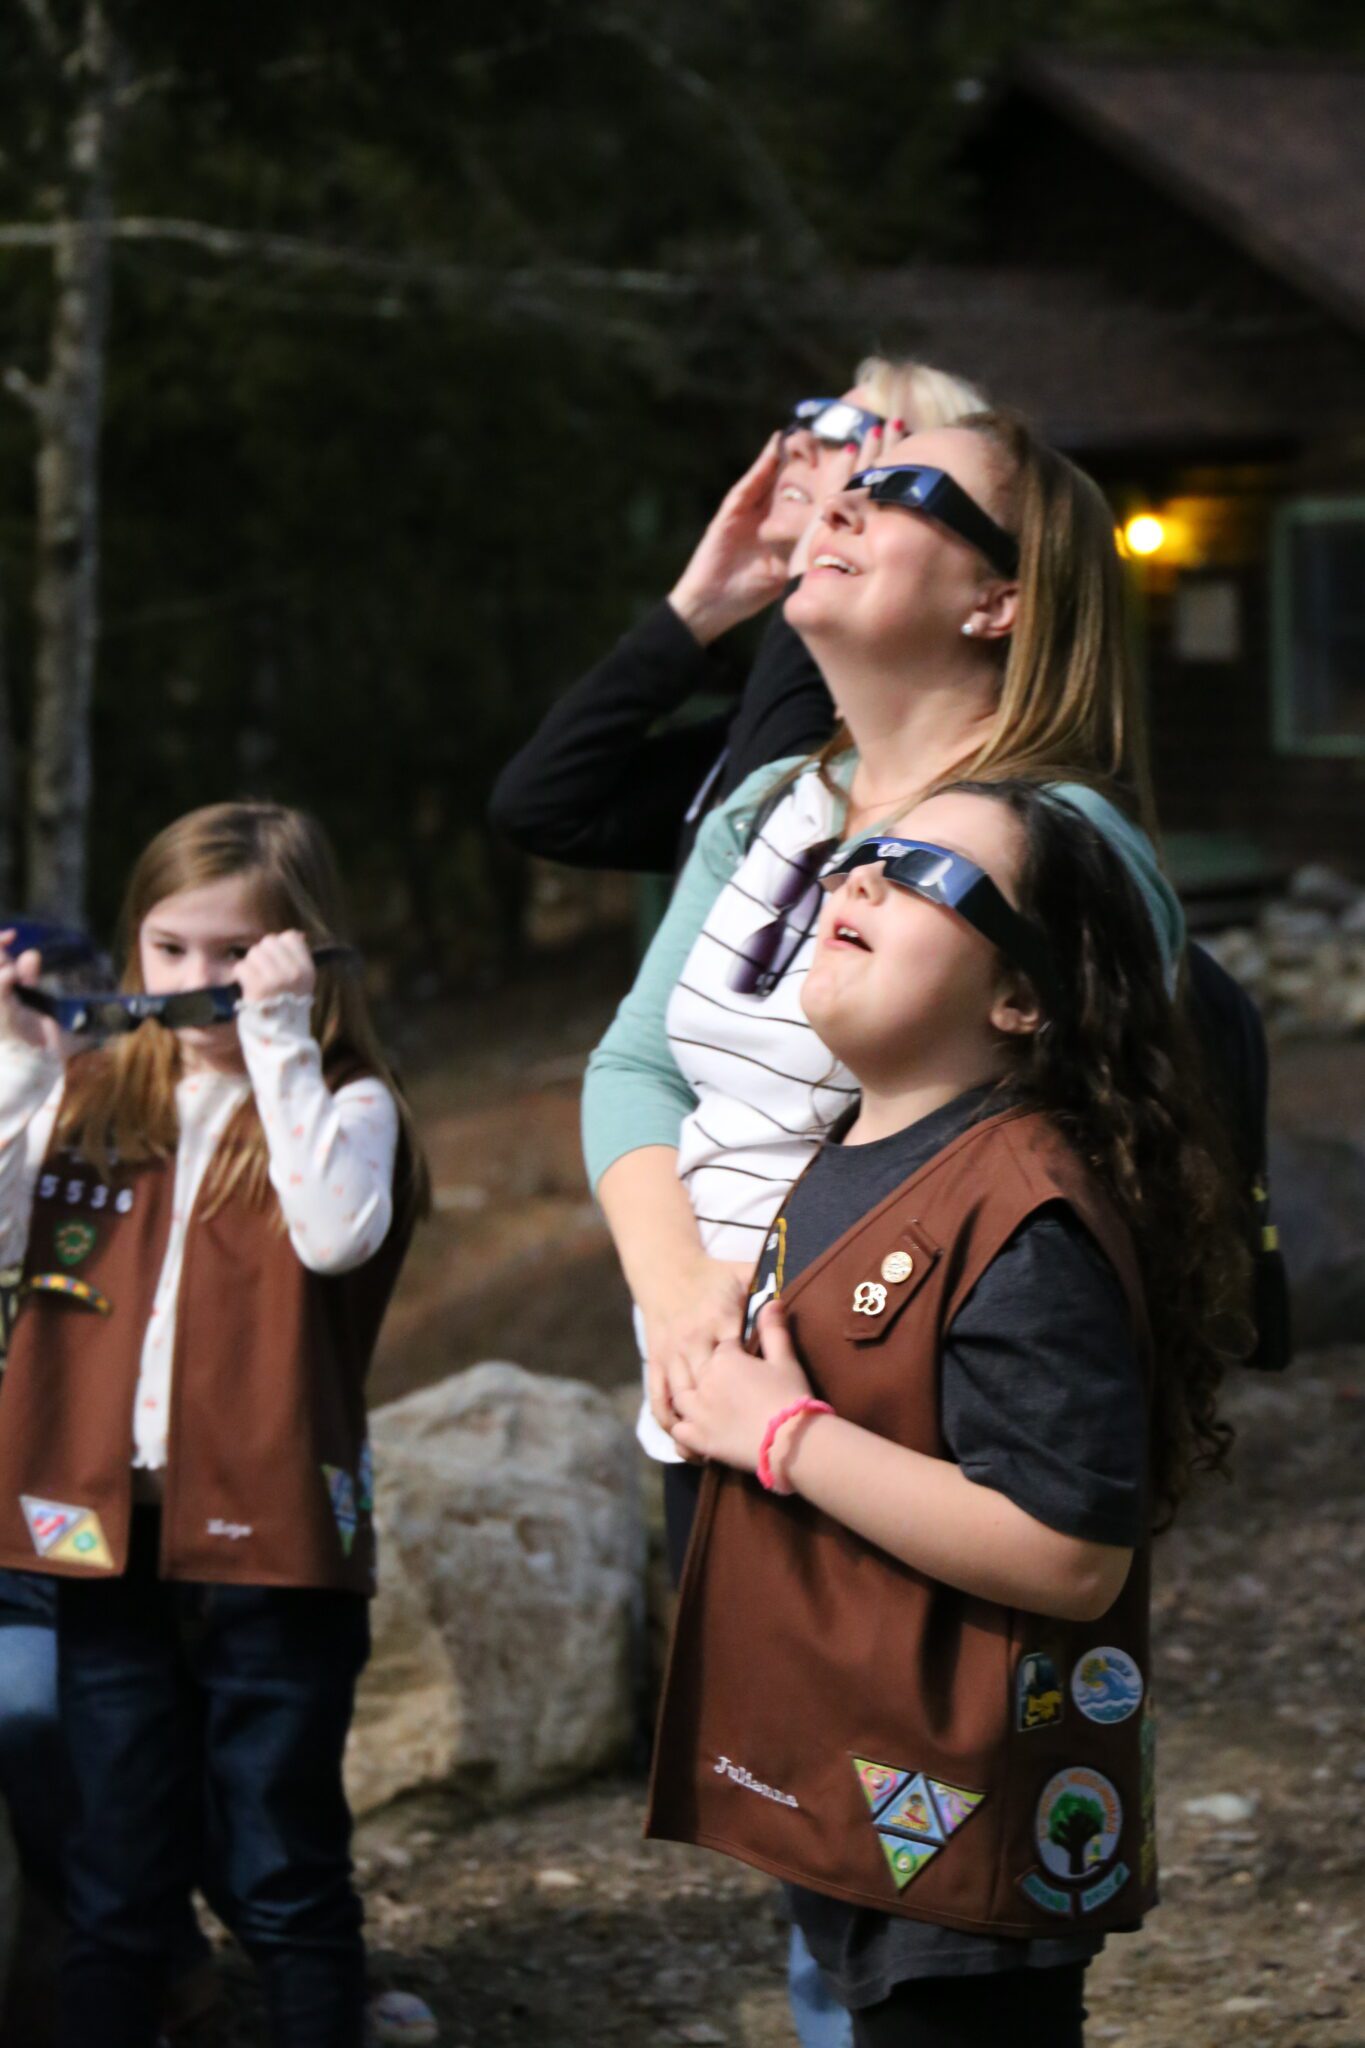 Eight-year-old Julianna Notaro, a Brownie from Wynantskill, watches the solar eclipse with her mother on Monday at Hidden Lake Girl Scout Camp in Lake Luzerne.